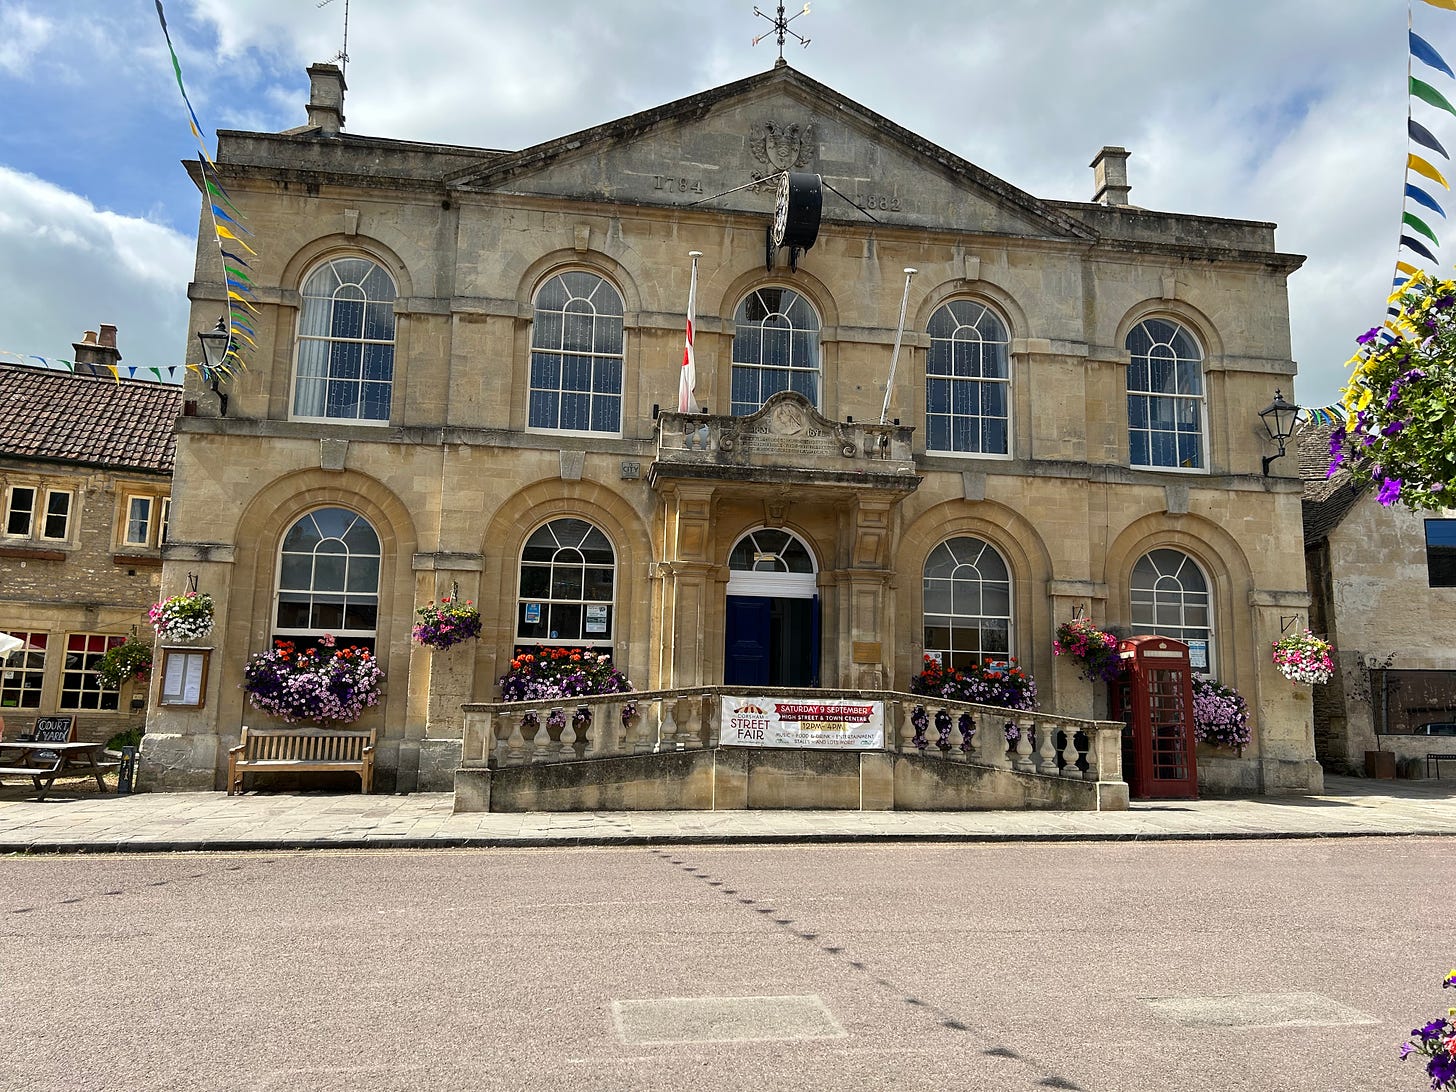 The stone built Corsham Town Hall. 4 windows on the ground floor with a central doorway and 5 windows on the first floor. A large clock is hung over the top middle window facing down the street rather than out from the building. Image: Roland's Travels